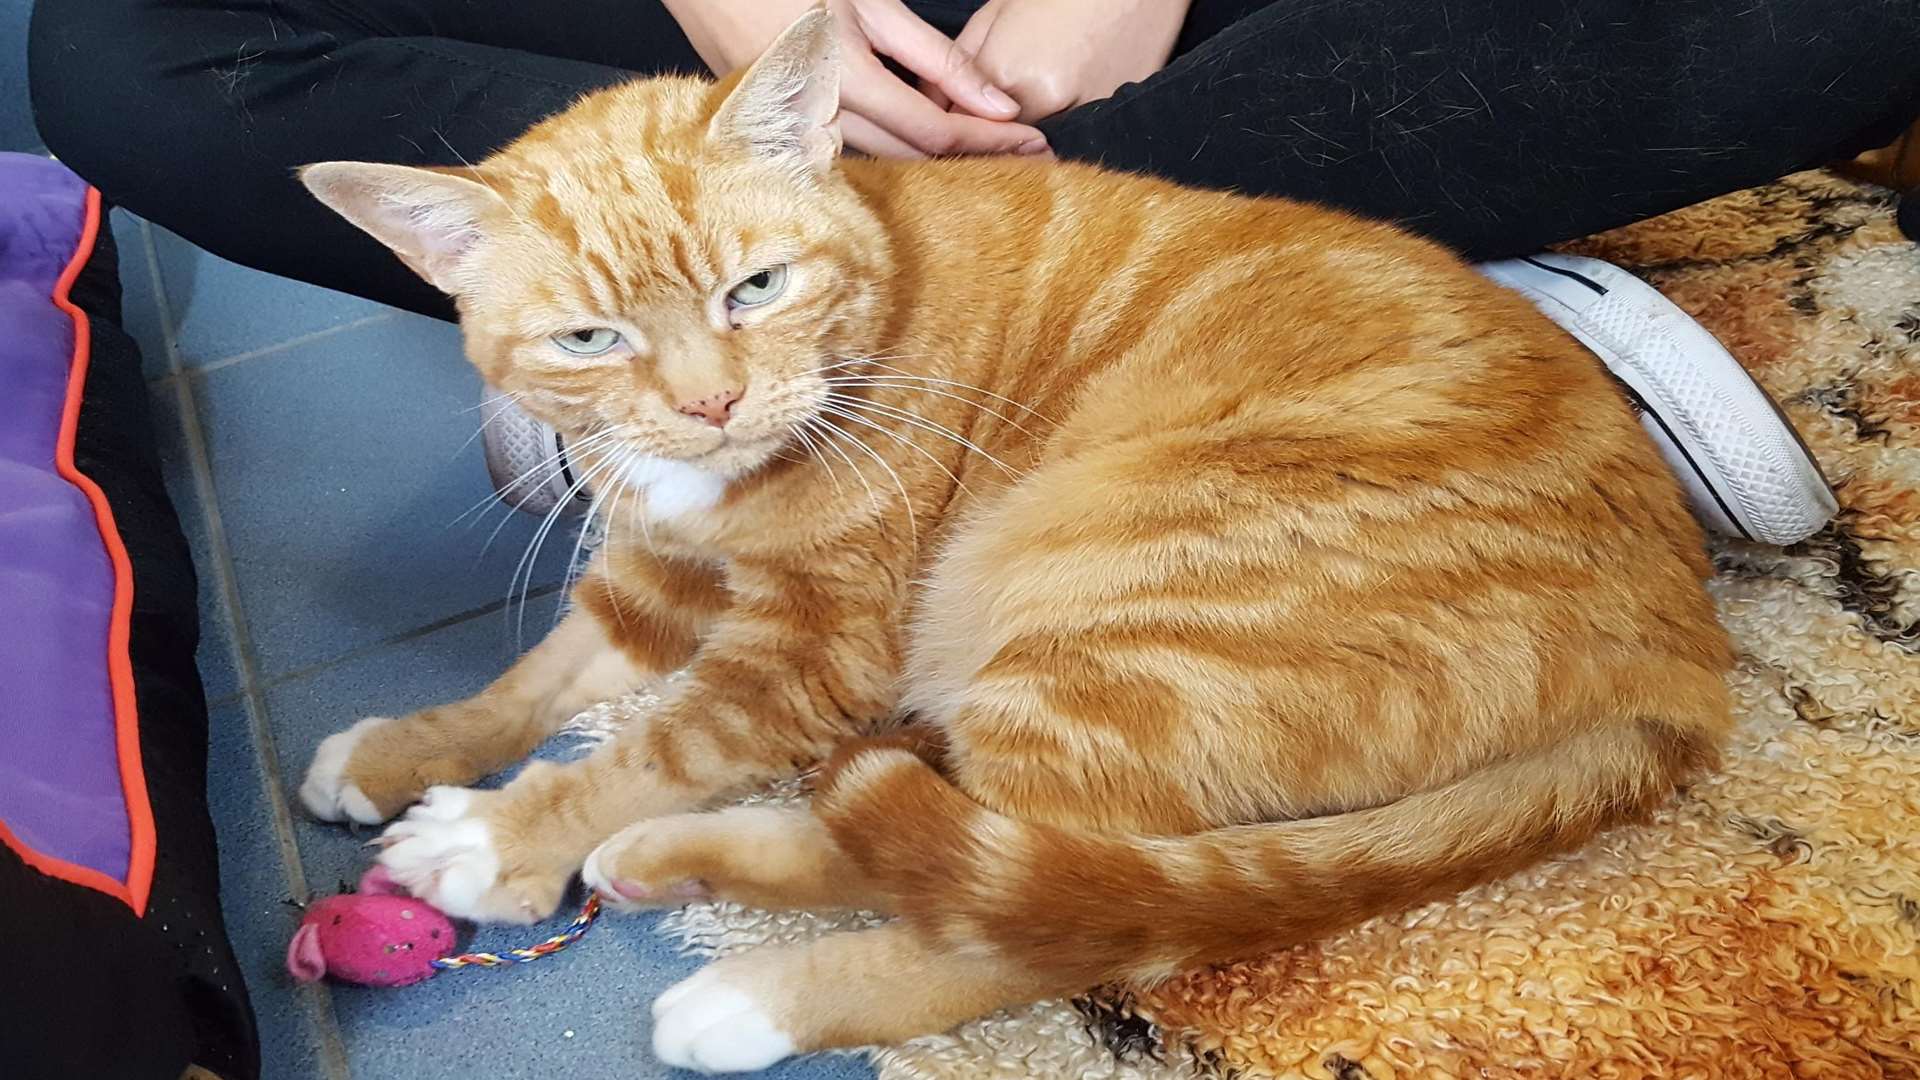 Eight-year-old Tommy is very affectionate and loves attention